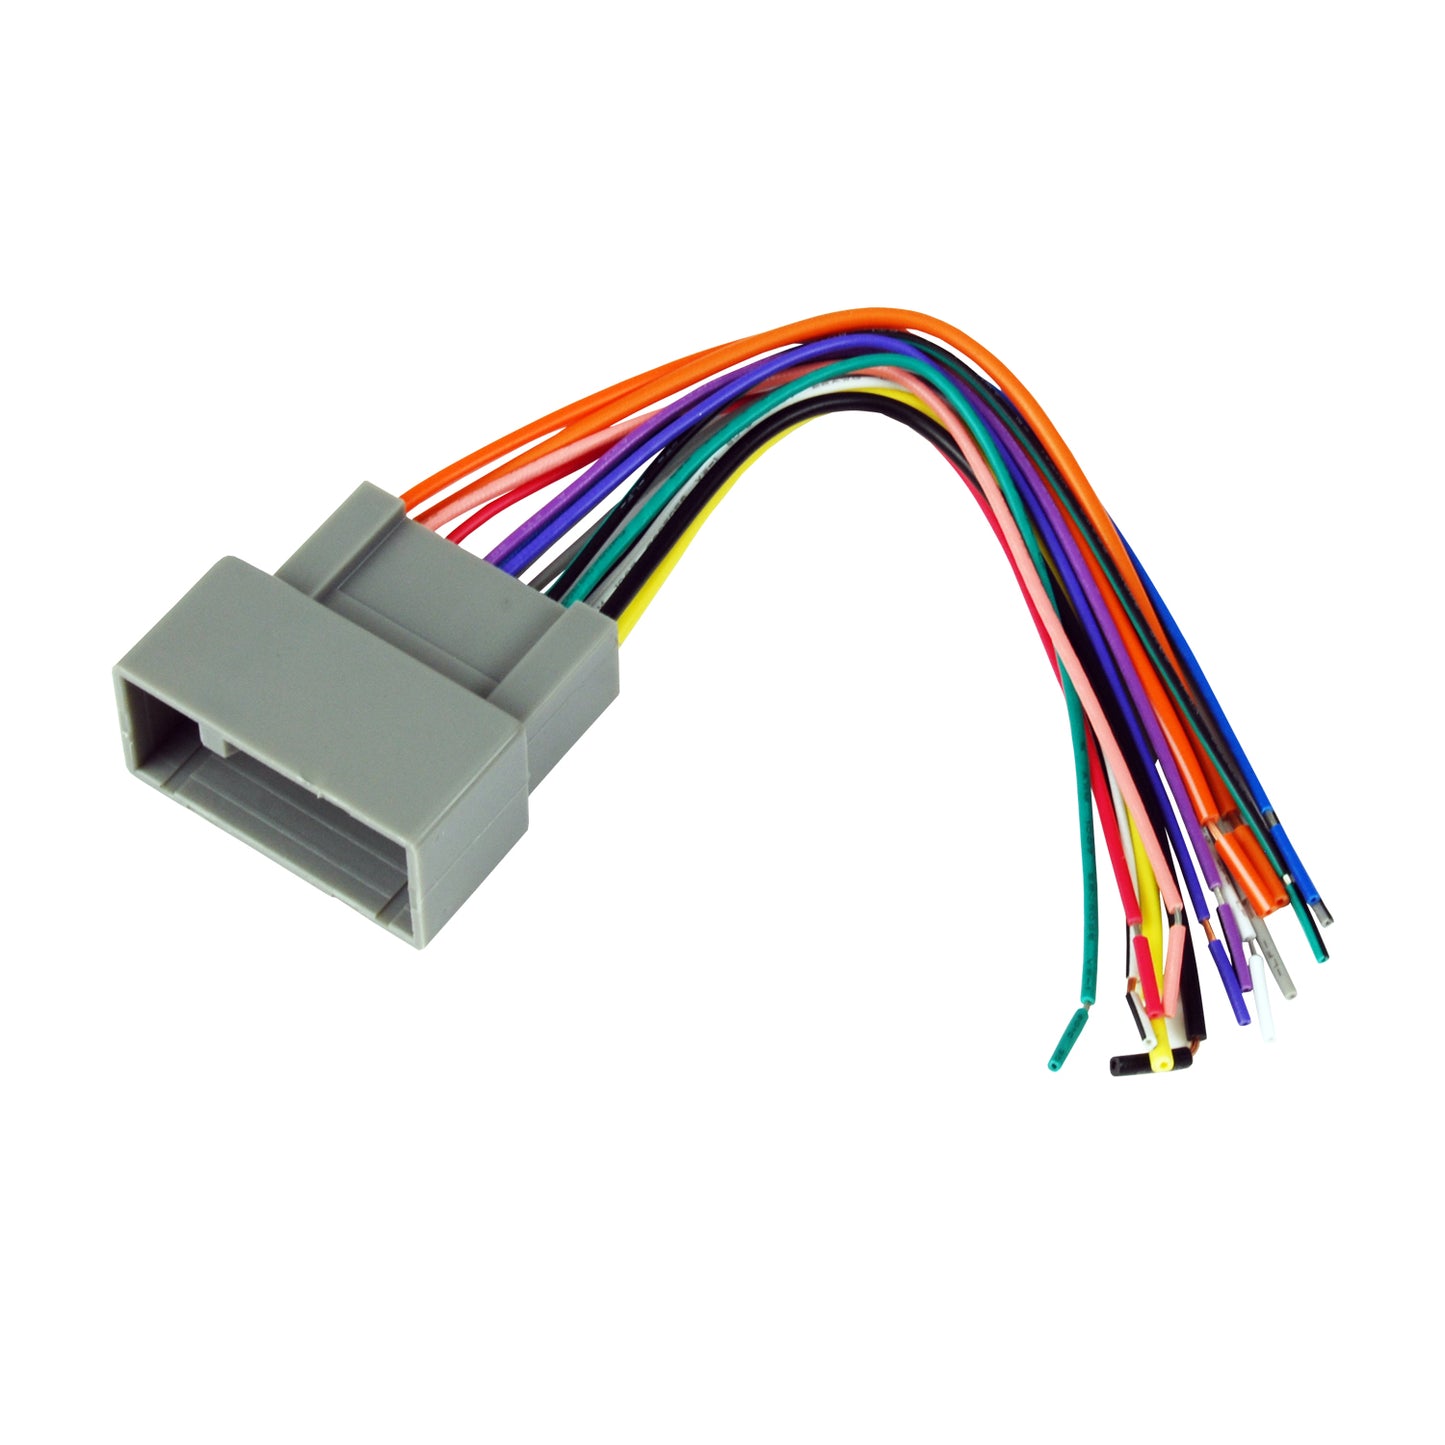 WH-HON 0208 - Wiring Harness for Honda